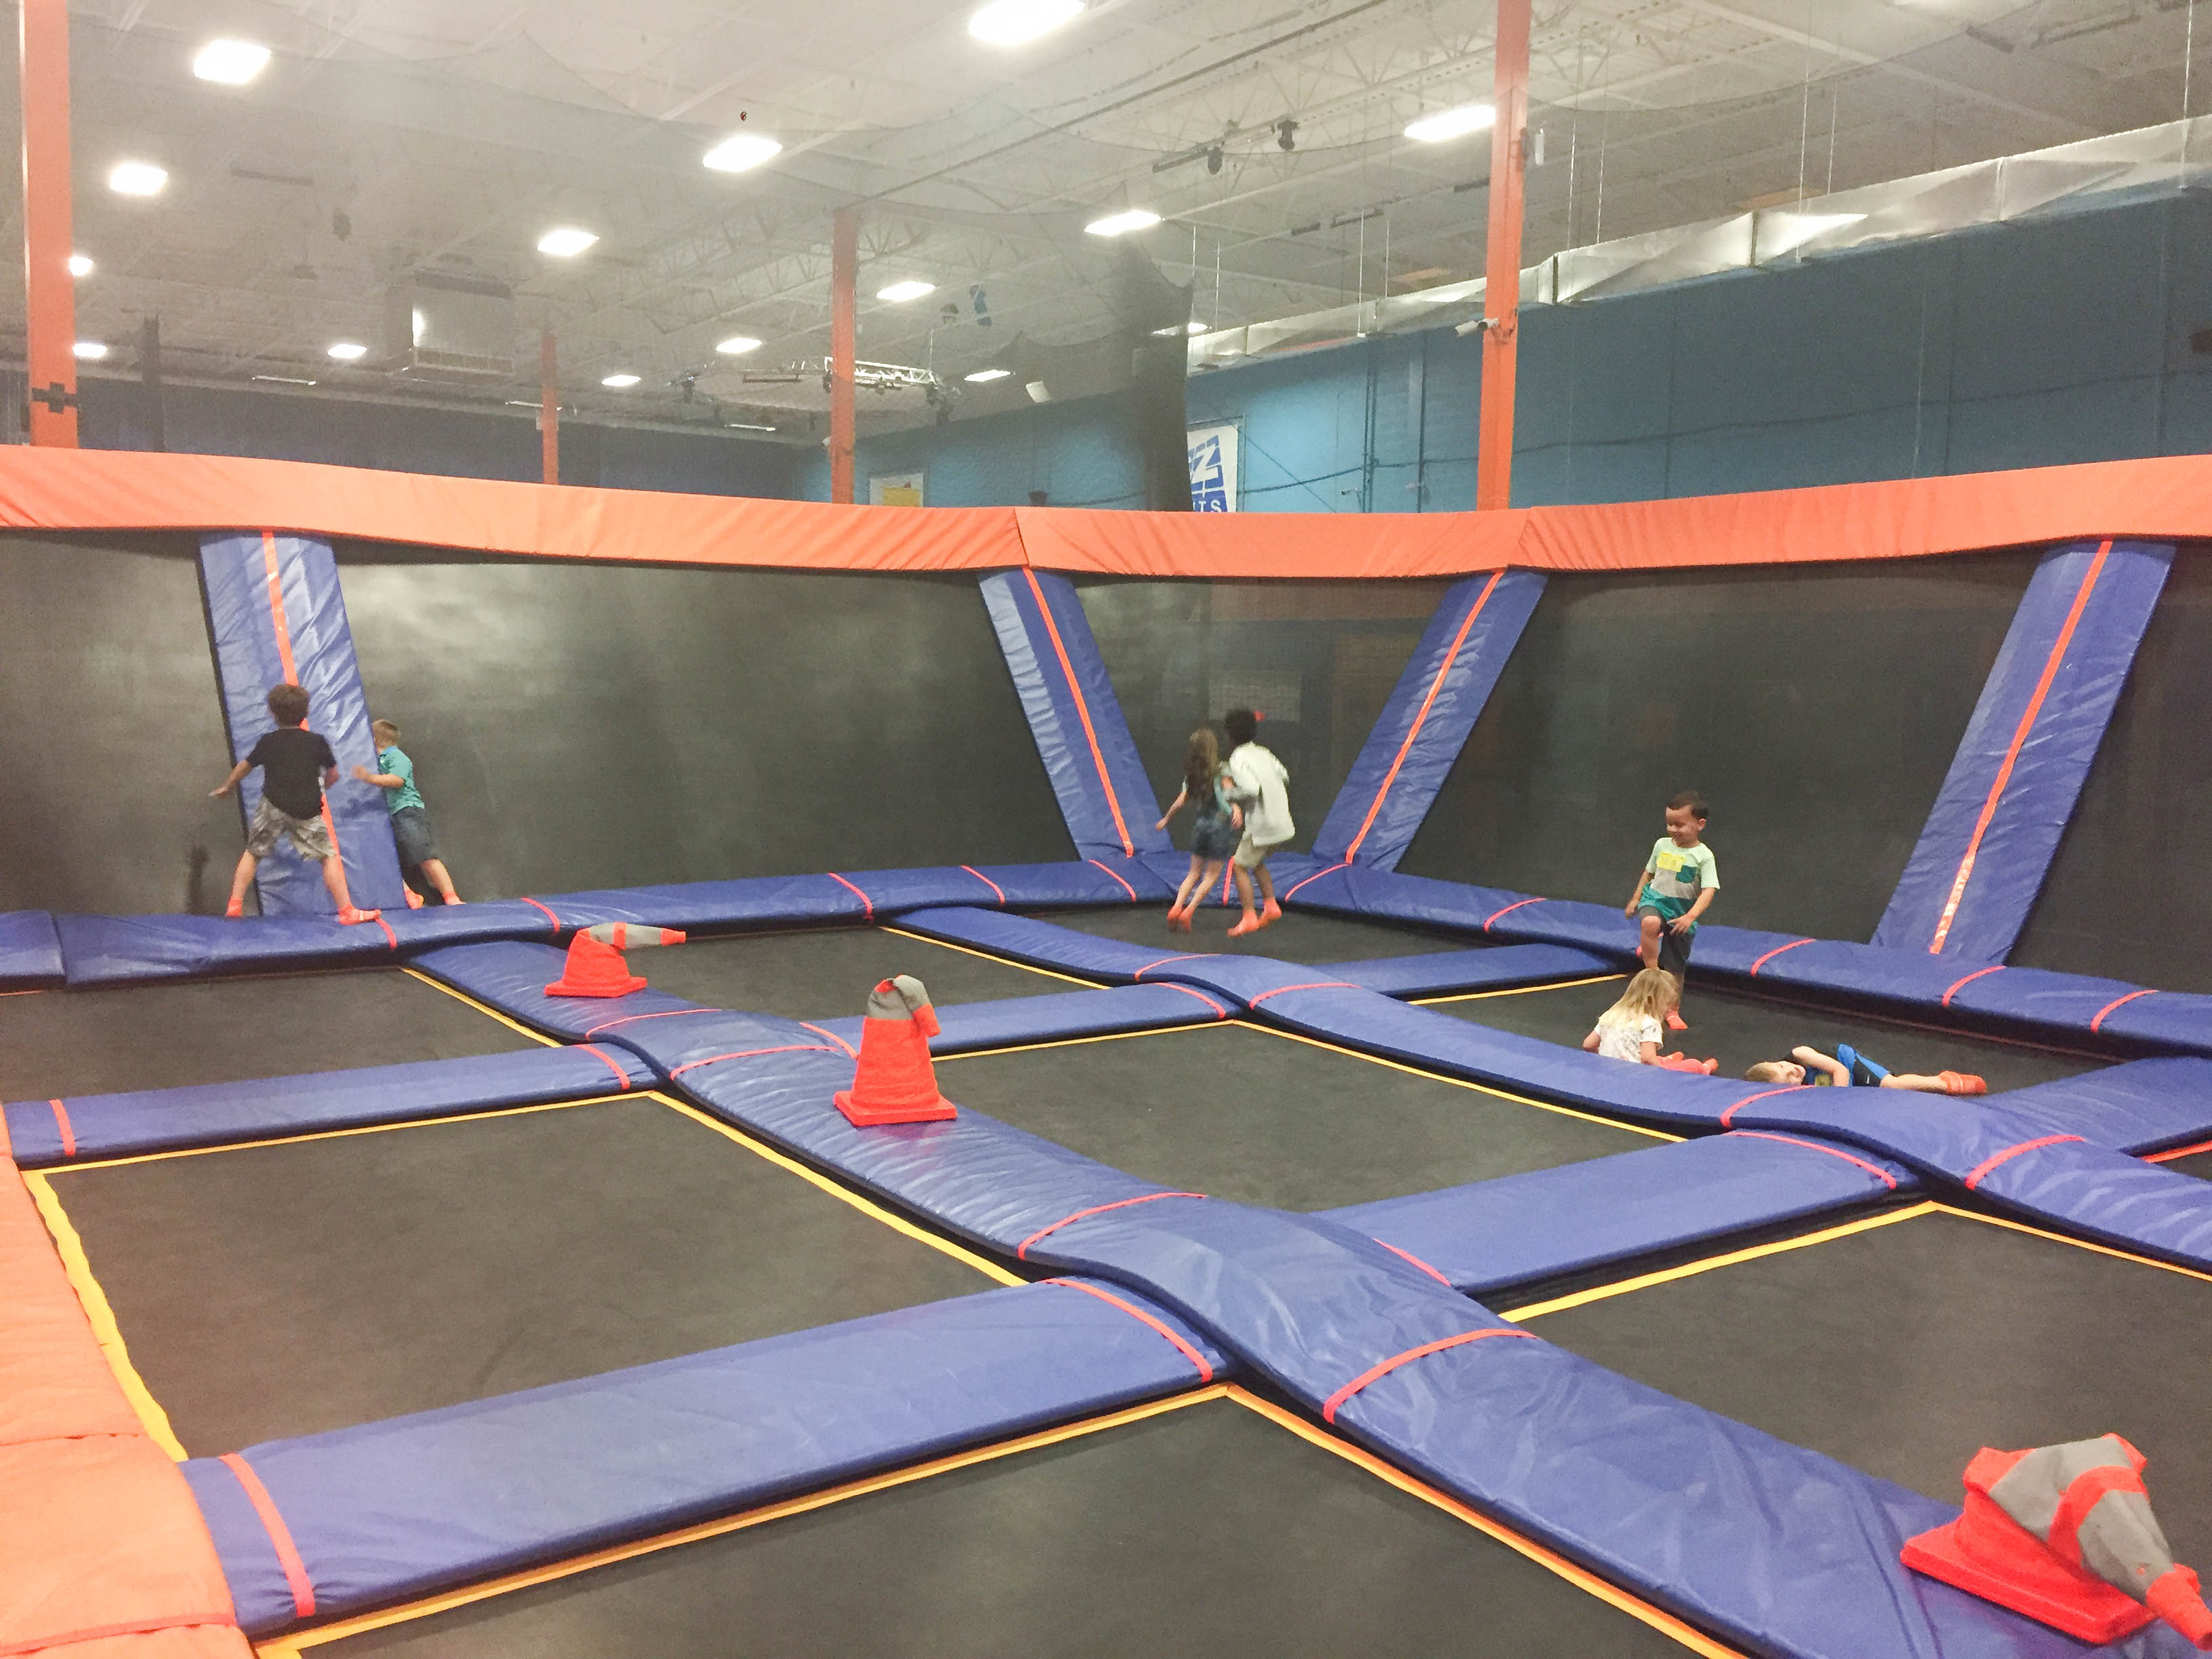 Sky Zone Trampoline Park Birthday Party; Livin' Life with Style